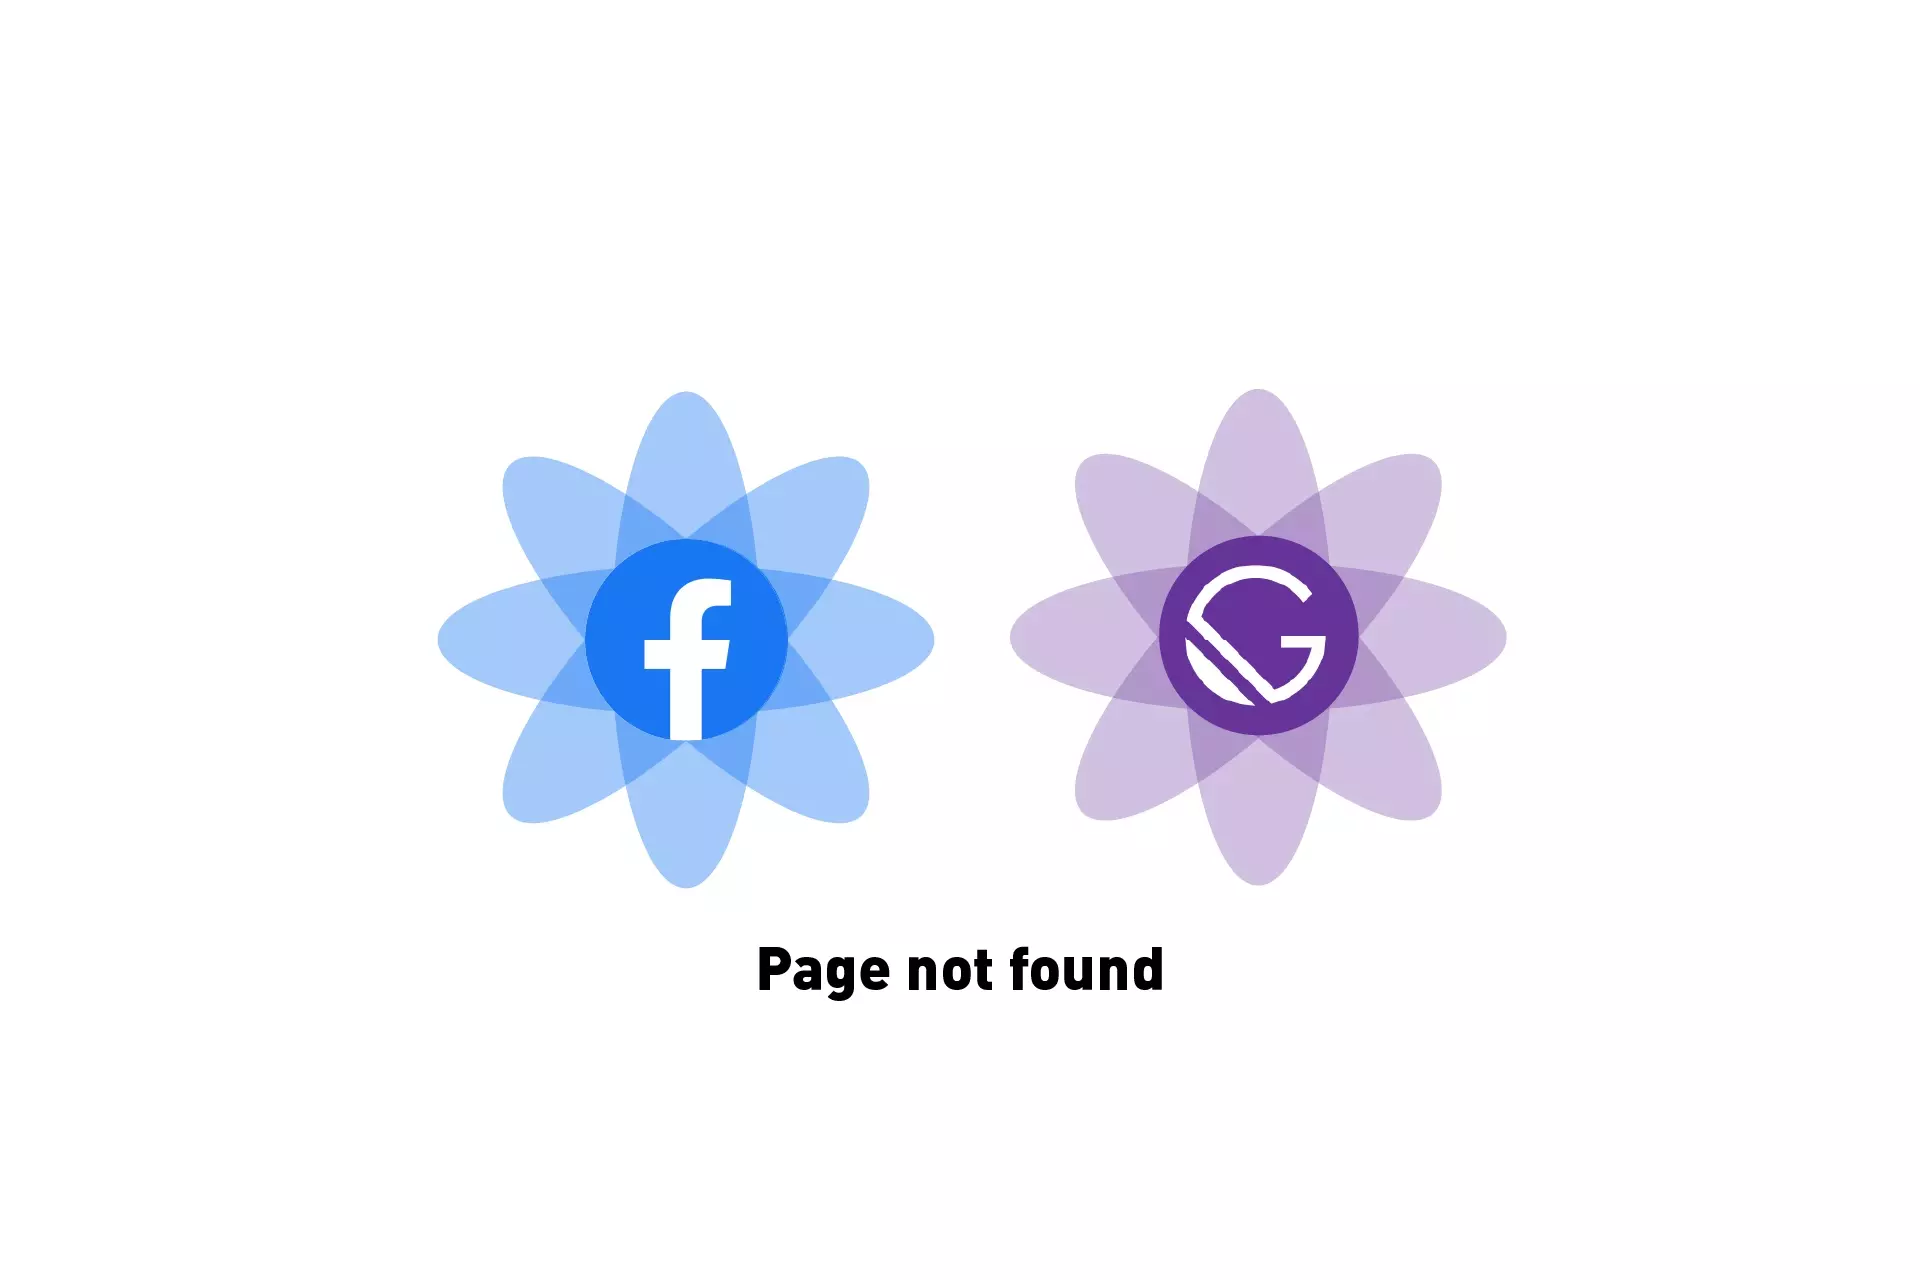 Two flowers that represent Facebook and Gatsby side by side with the text "Page not found" below it.